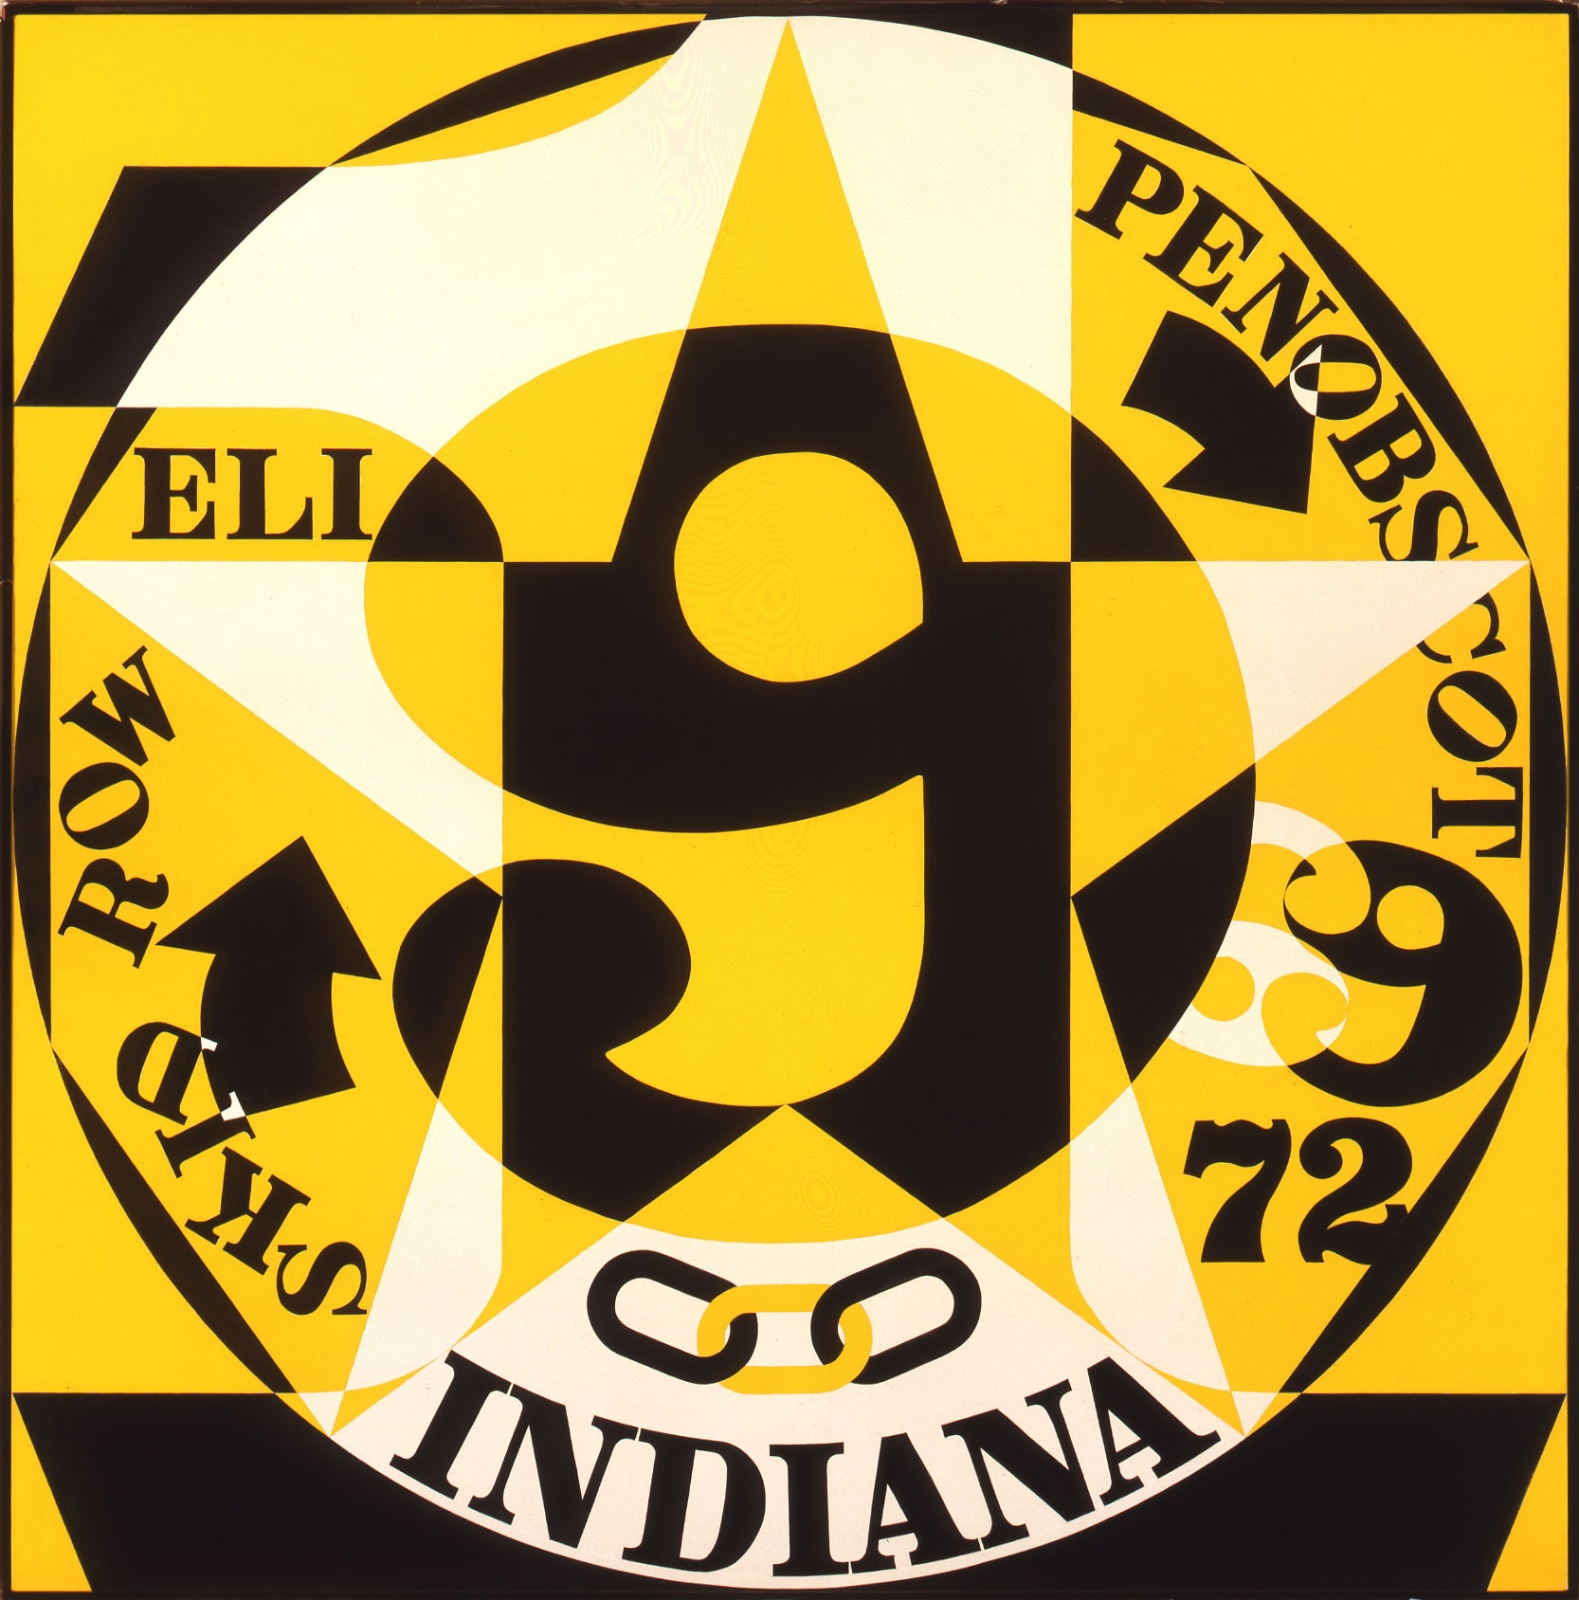 Indiana’s Indianas: A Twenty-Year Retrospective of Painting and Sculpture from the Collection of Robert Indiana - Farnsworth Art Museum - Exhibitions - Robert Indiana